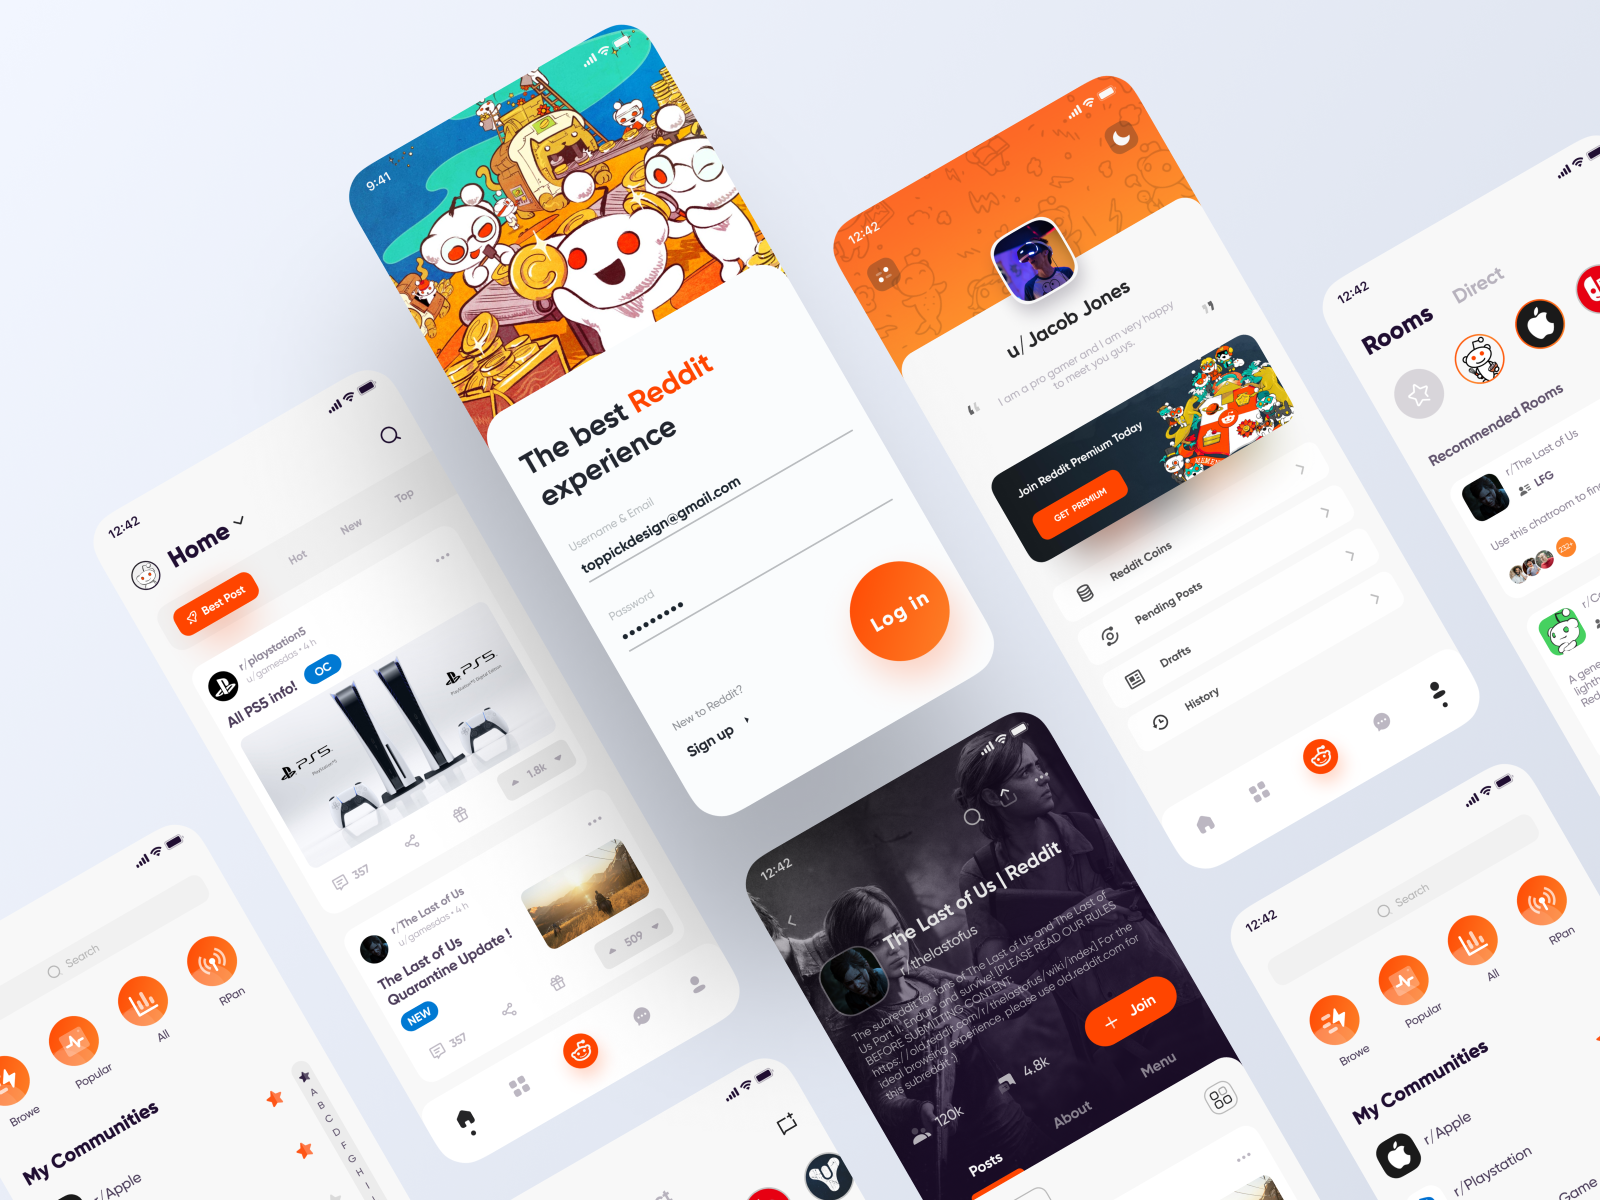 Reddit App Redesign-2 by YueYue for Top Pick Studio on Dribbble